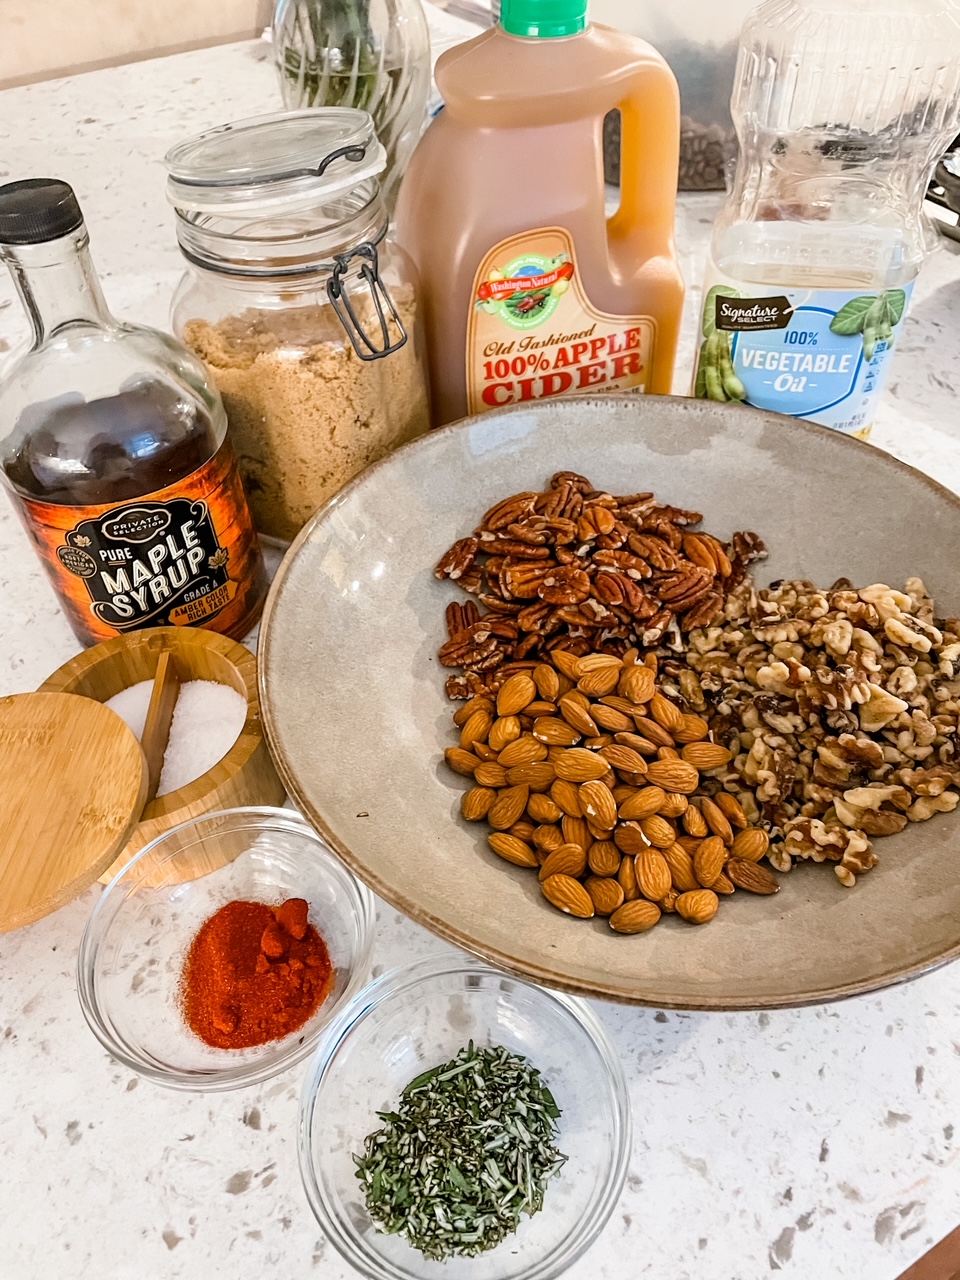 The ingredients for the Rosemary Maple Spiced Nuts - the nut mix, maple syrup, and spices on a counter